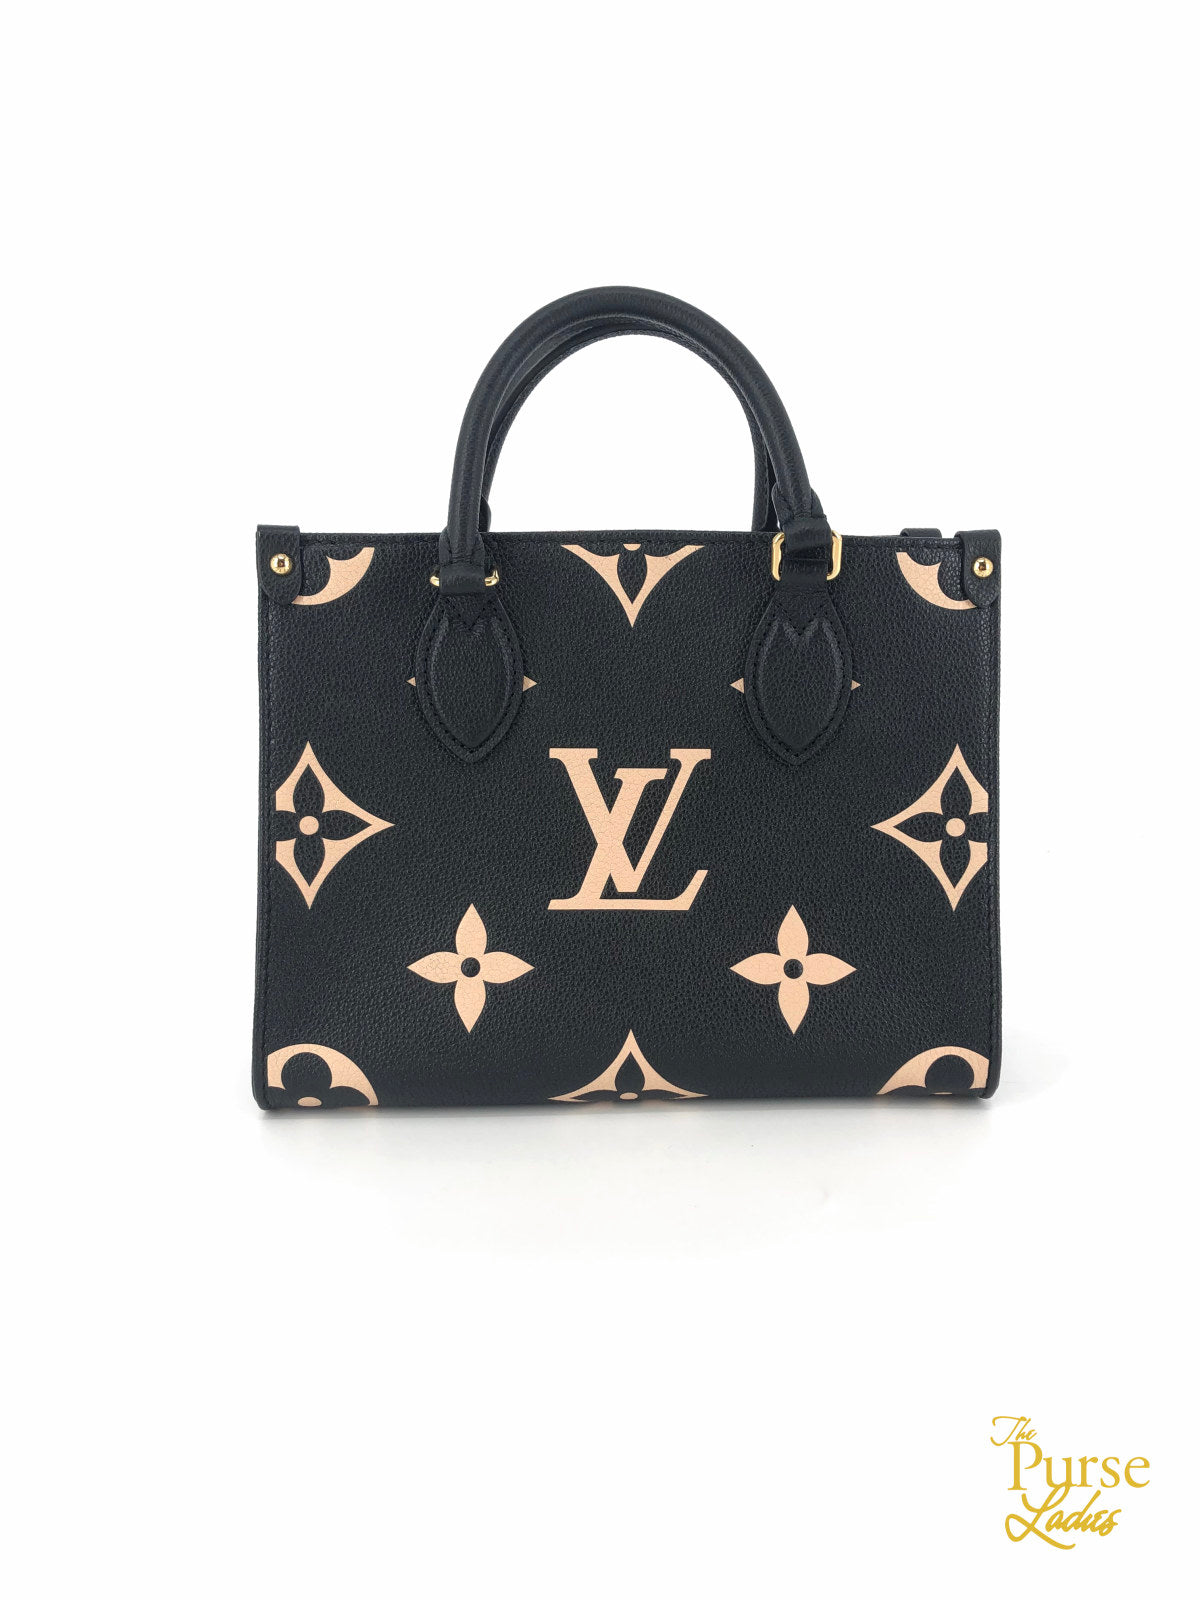 Authentic Louis Vuitton Bags, Shoes, and Accessories – The Purse Ladies